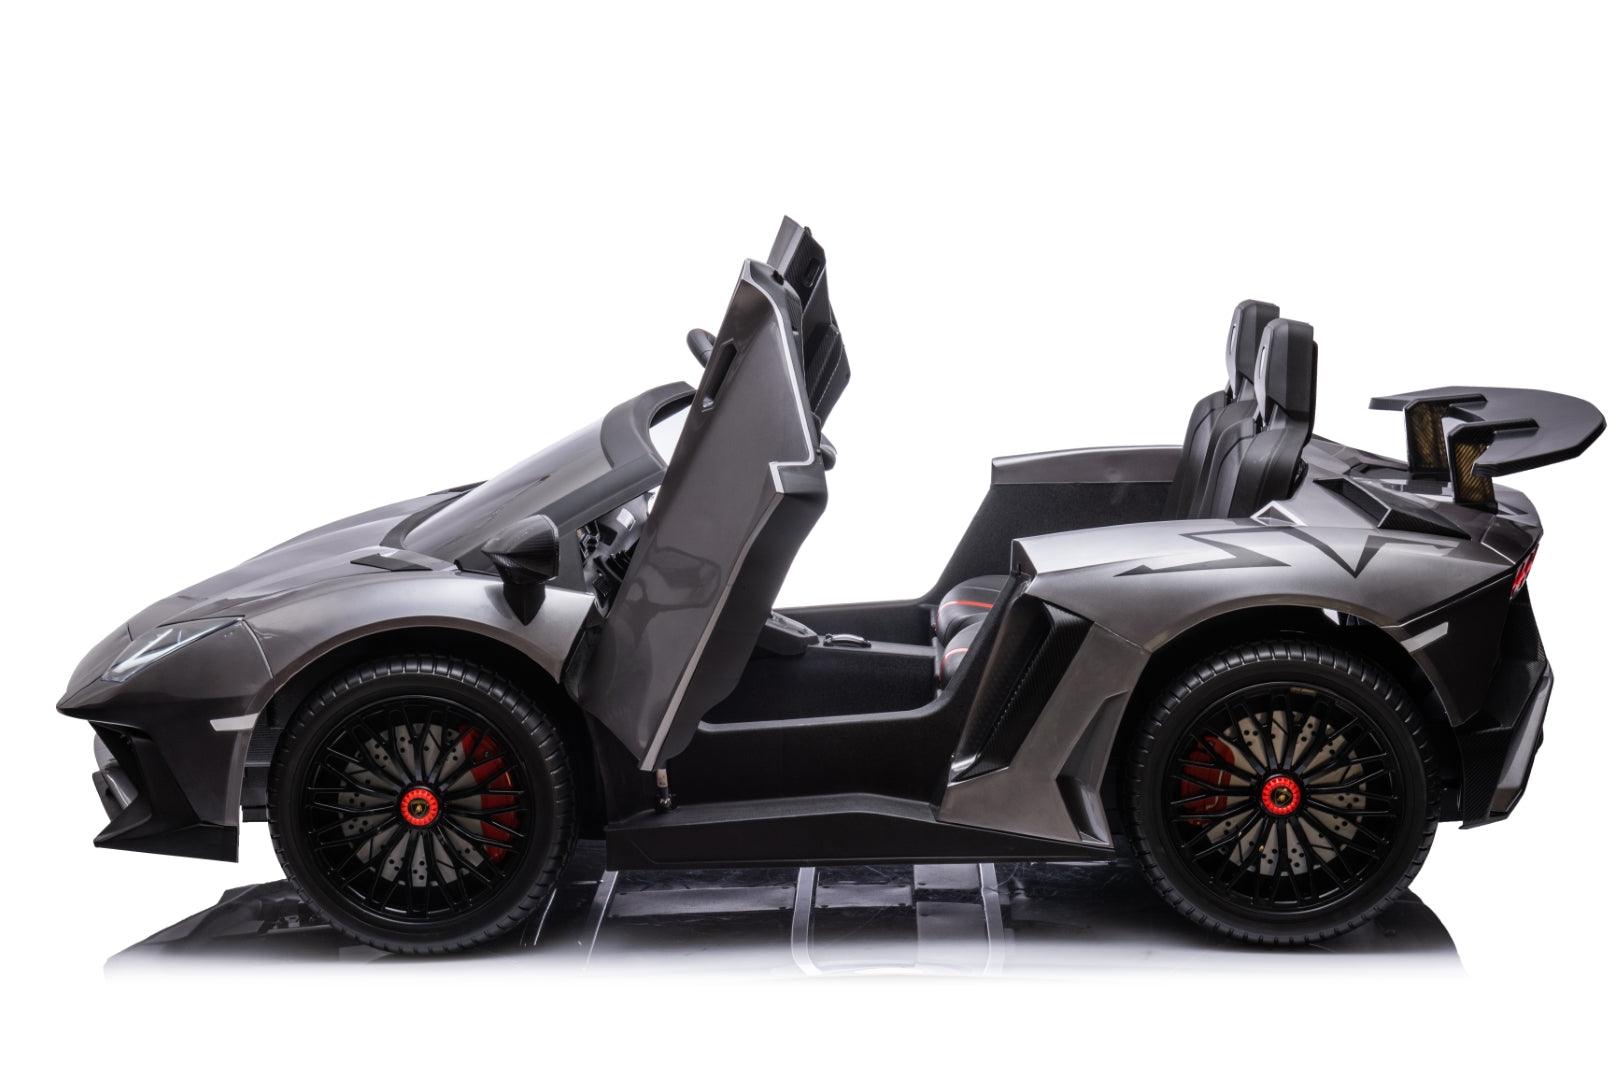 24V Lamborghini Aventador 2 Seater Ride On Car for Kids: Advanced Brushless Motor & Differential for High-Octane Fun - DTI Direct Canada